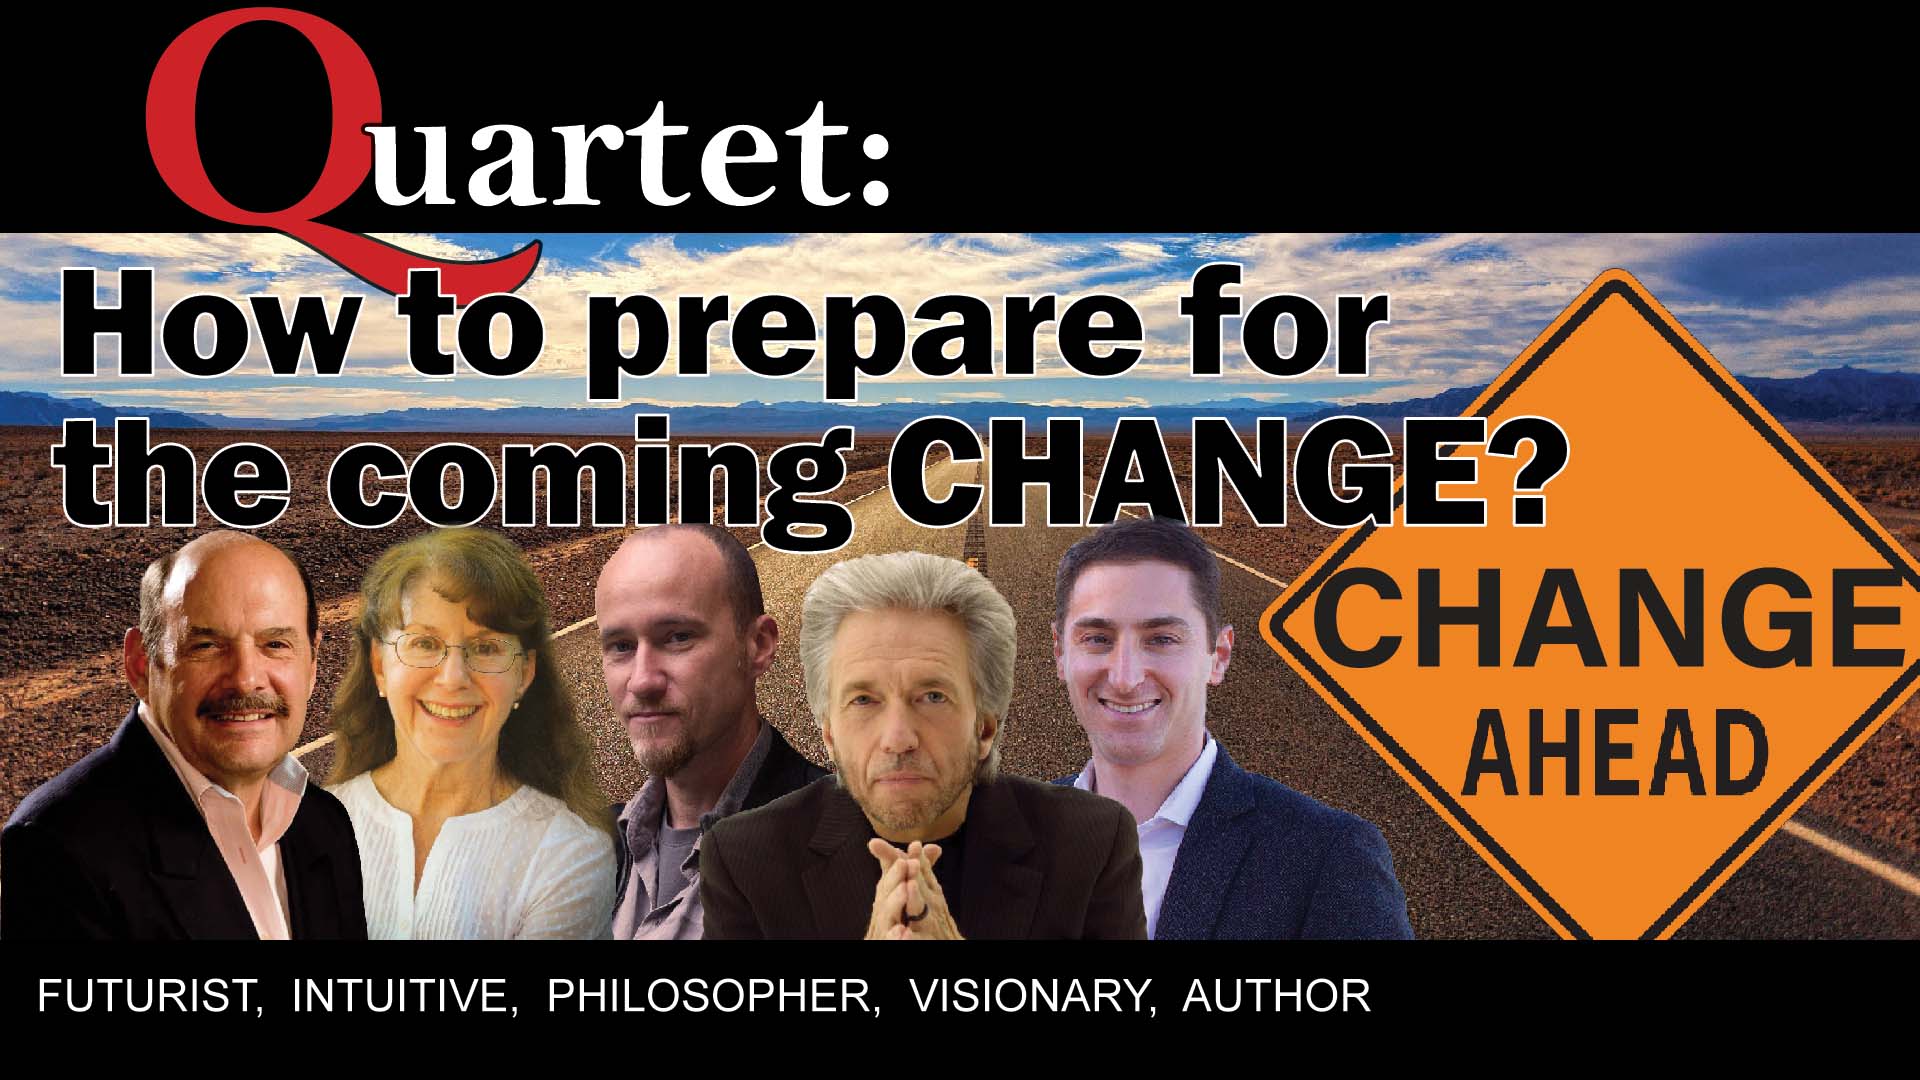 How to prepare for the coming change? Quartet